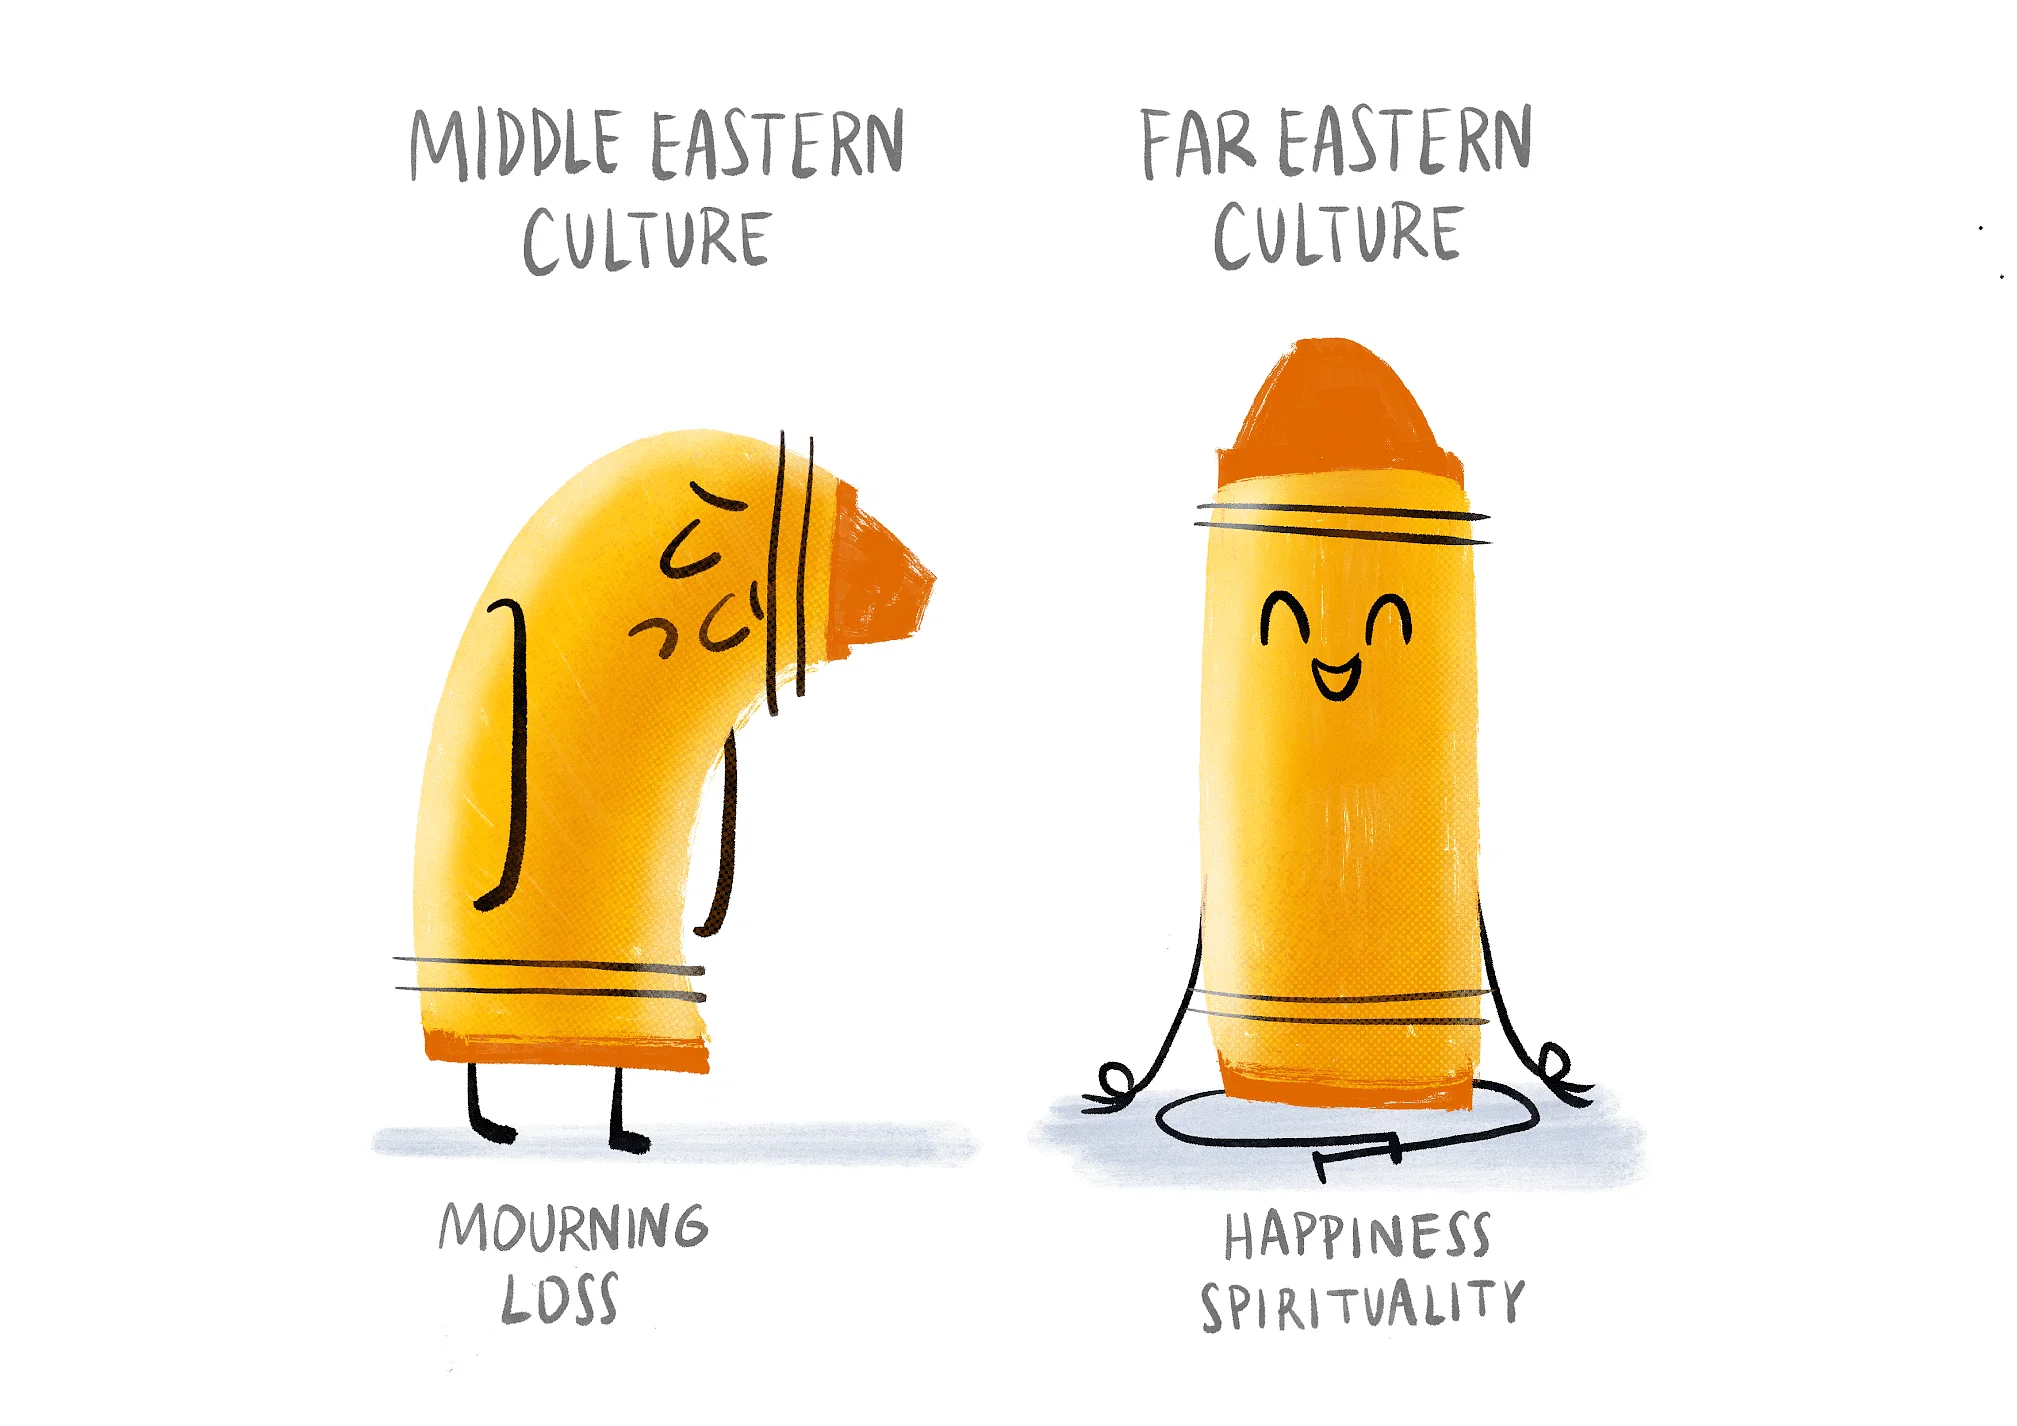 An illustration of two yellow crayons, one depicting mourning or loss, and the other happiness and spirituality